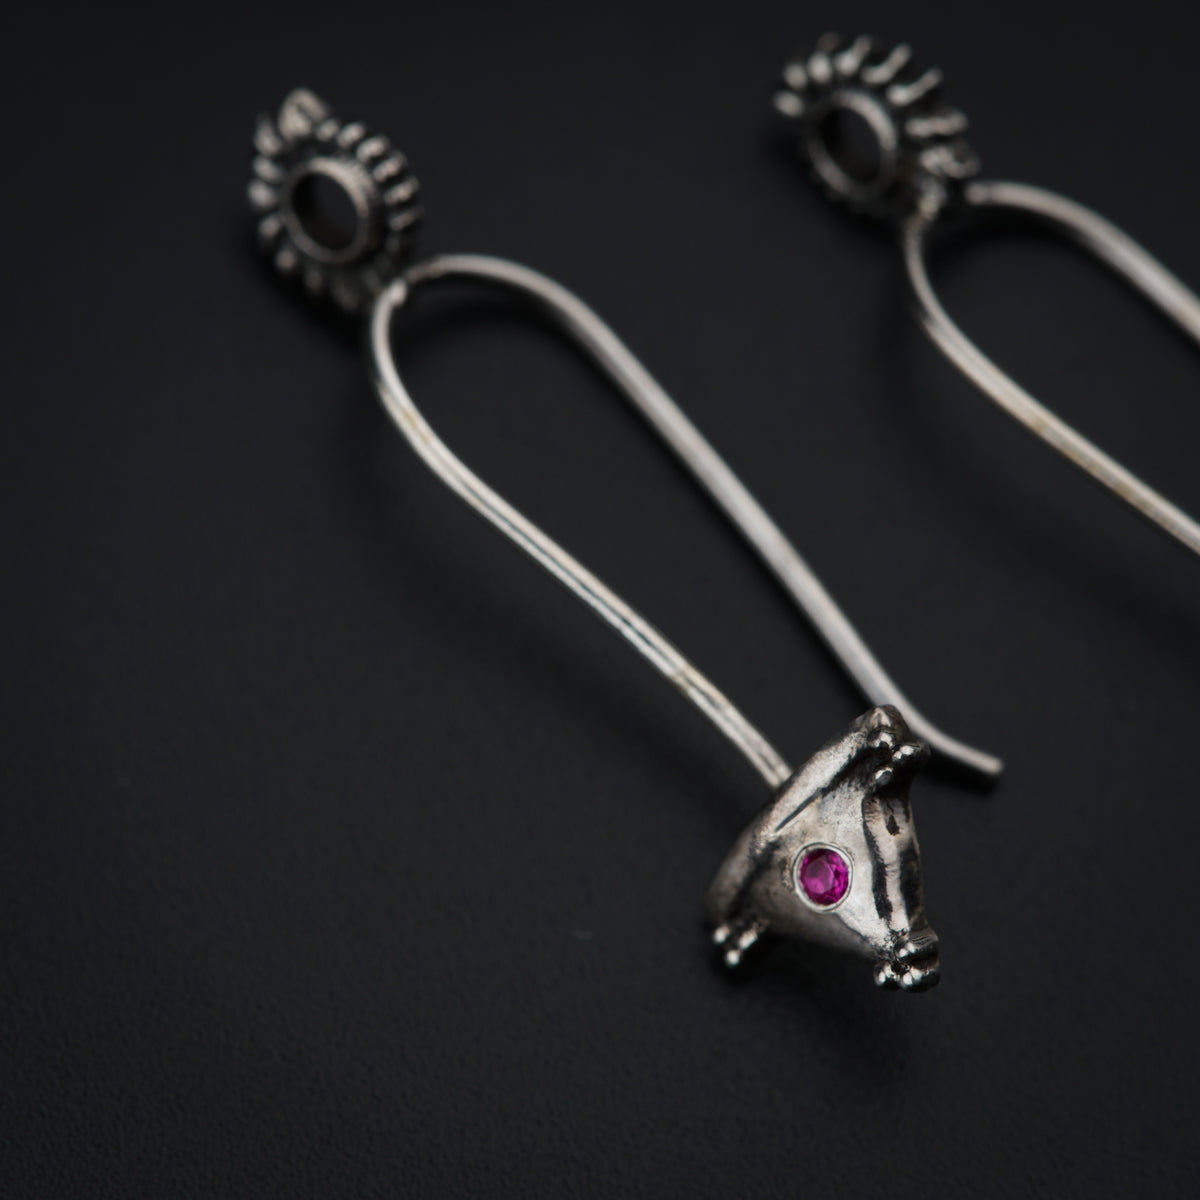 a pair of silver earrings with a pink stone